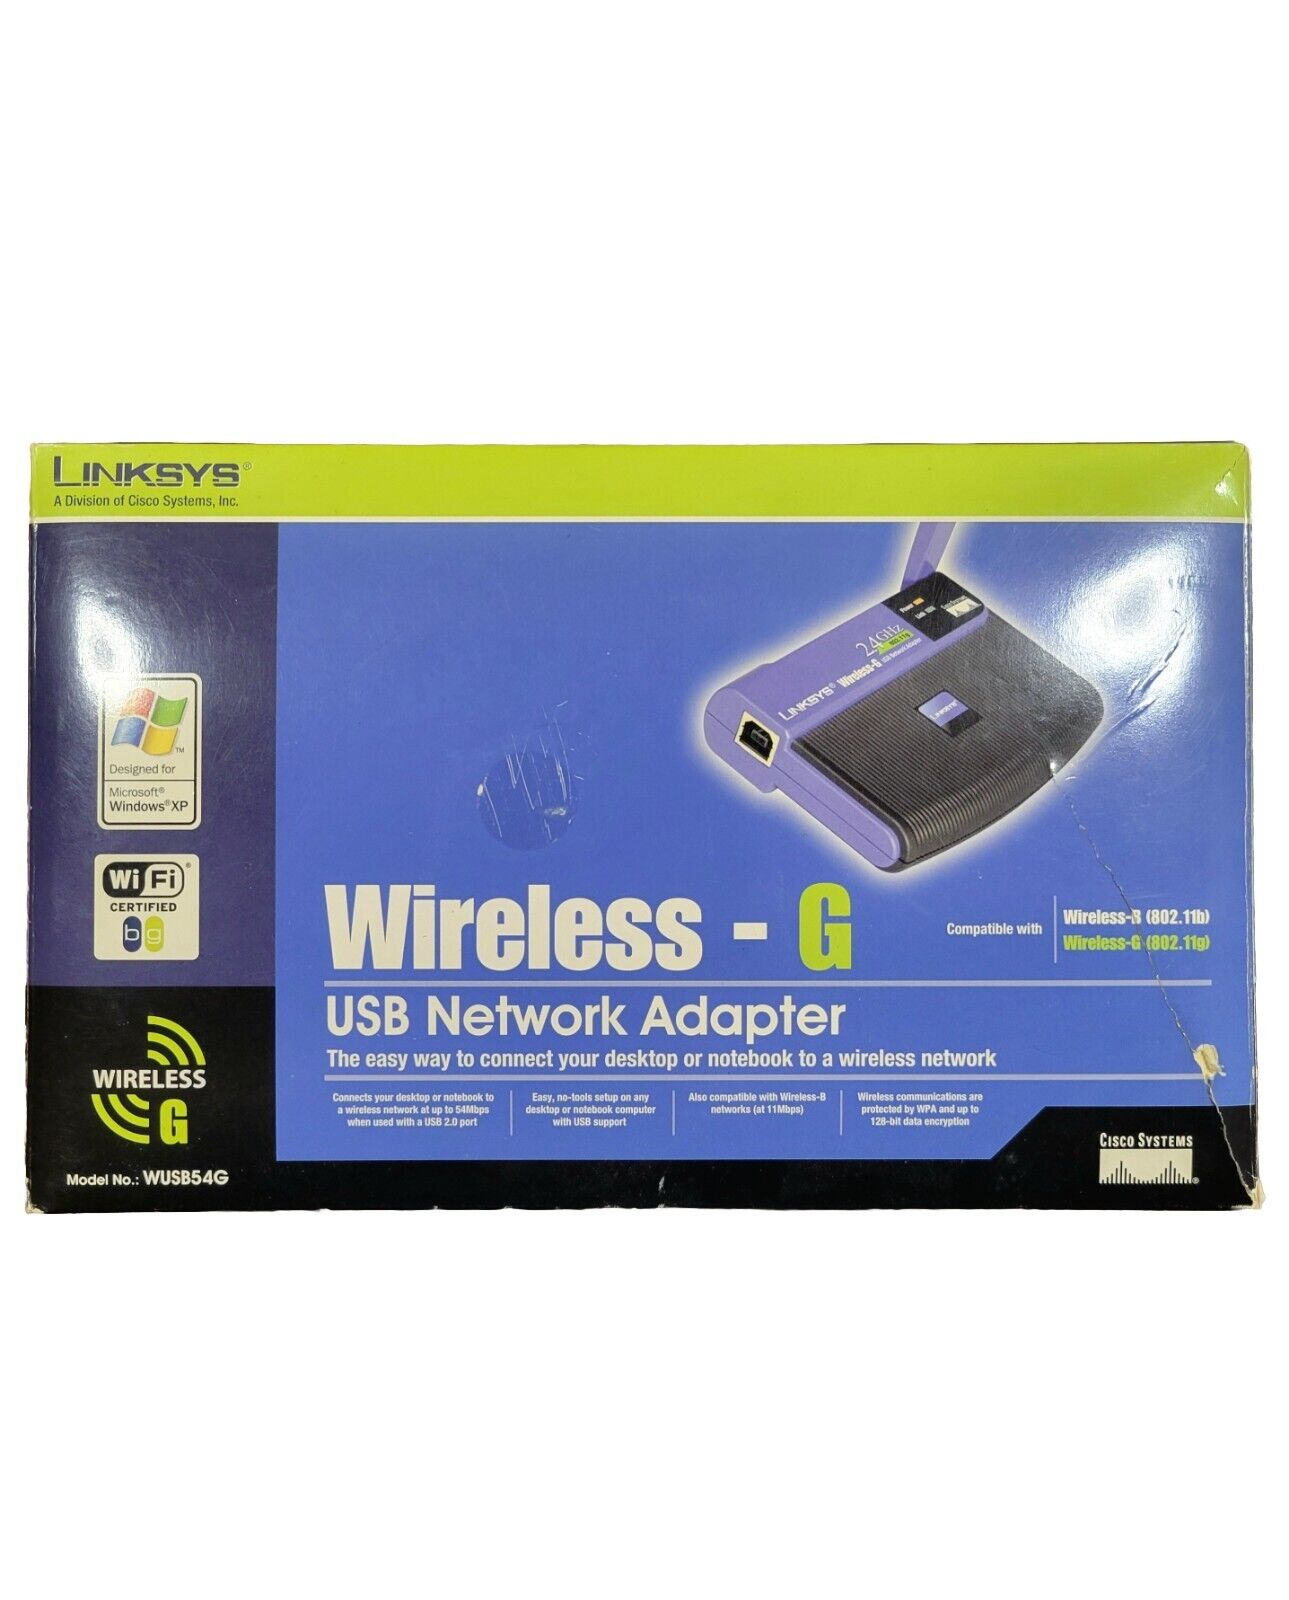 LINKSYS WUSB54G Wireless-G USB Network Adapter, Open Damaged Outter Box, New 